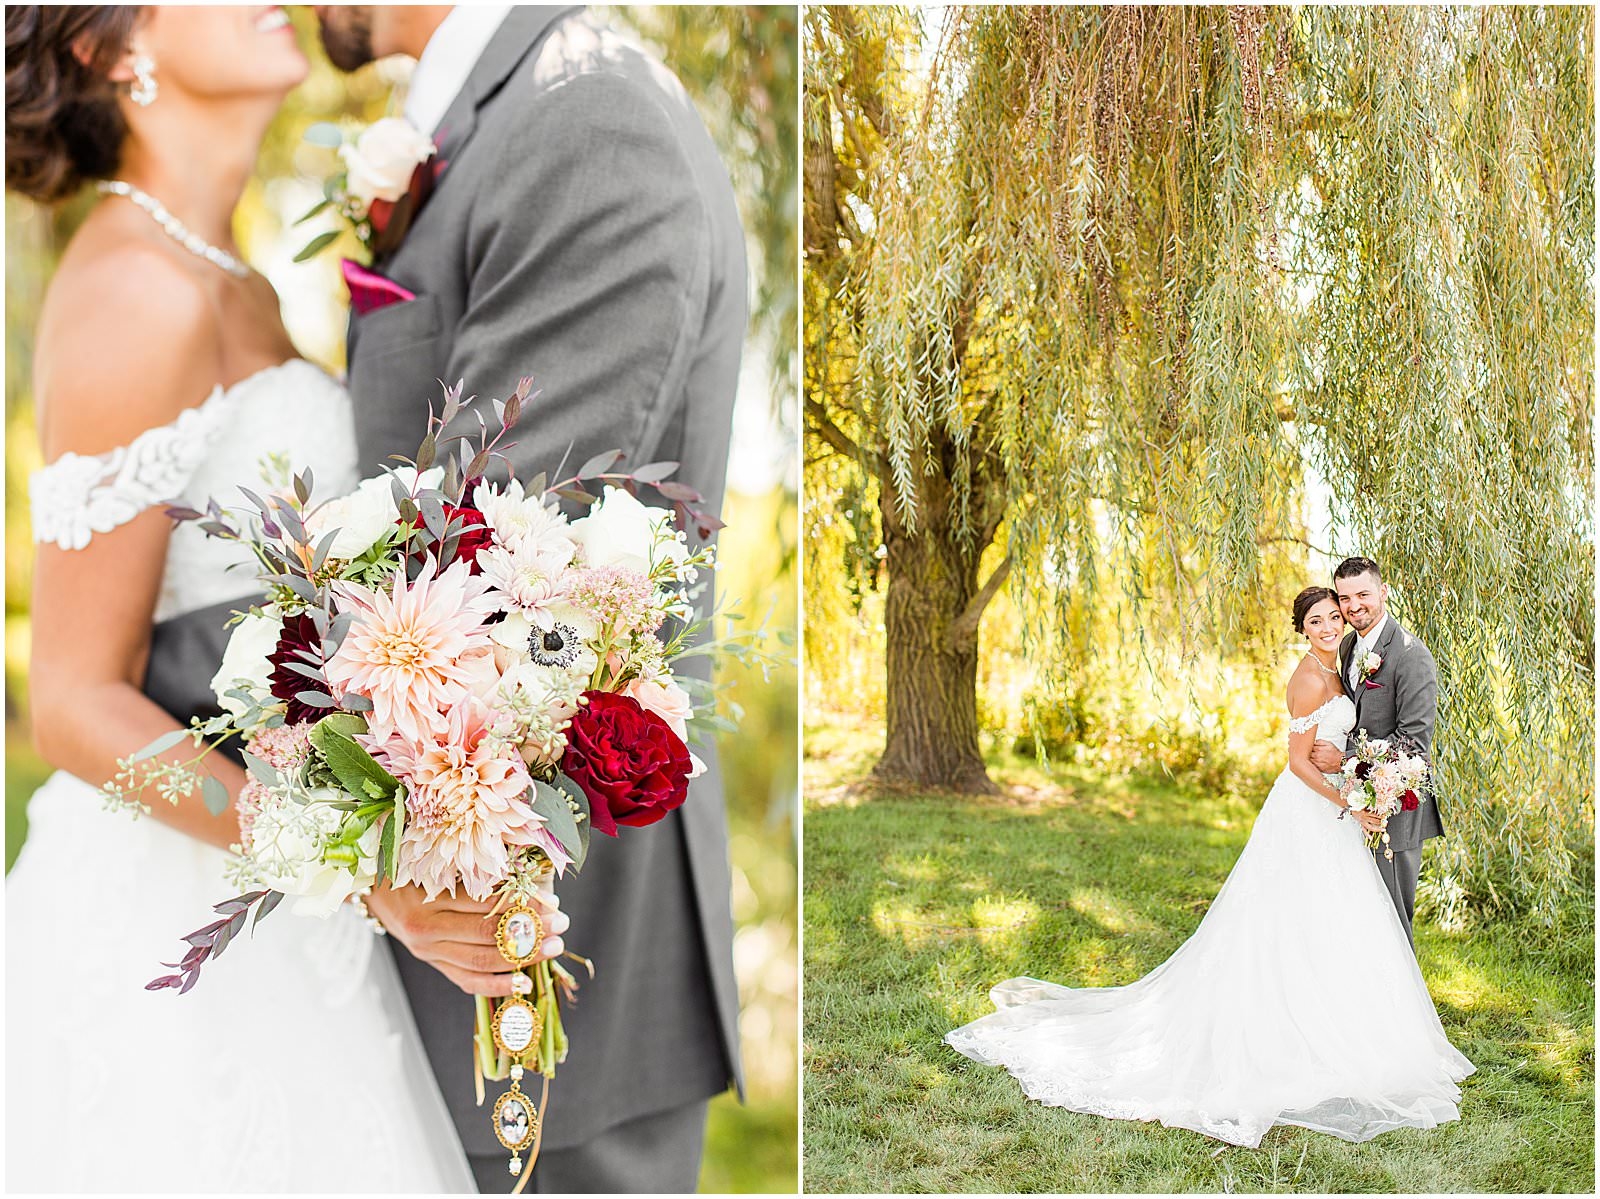 A Stunning Fall Wedding in Indianapolis, IN |. Sally and Andrew | Bret and Brandie Photography 0064.jpg